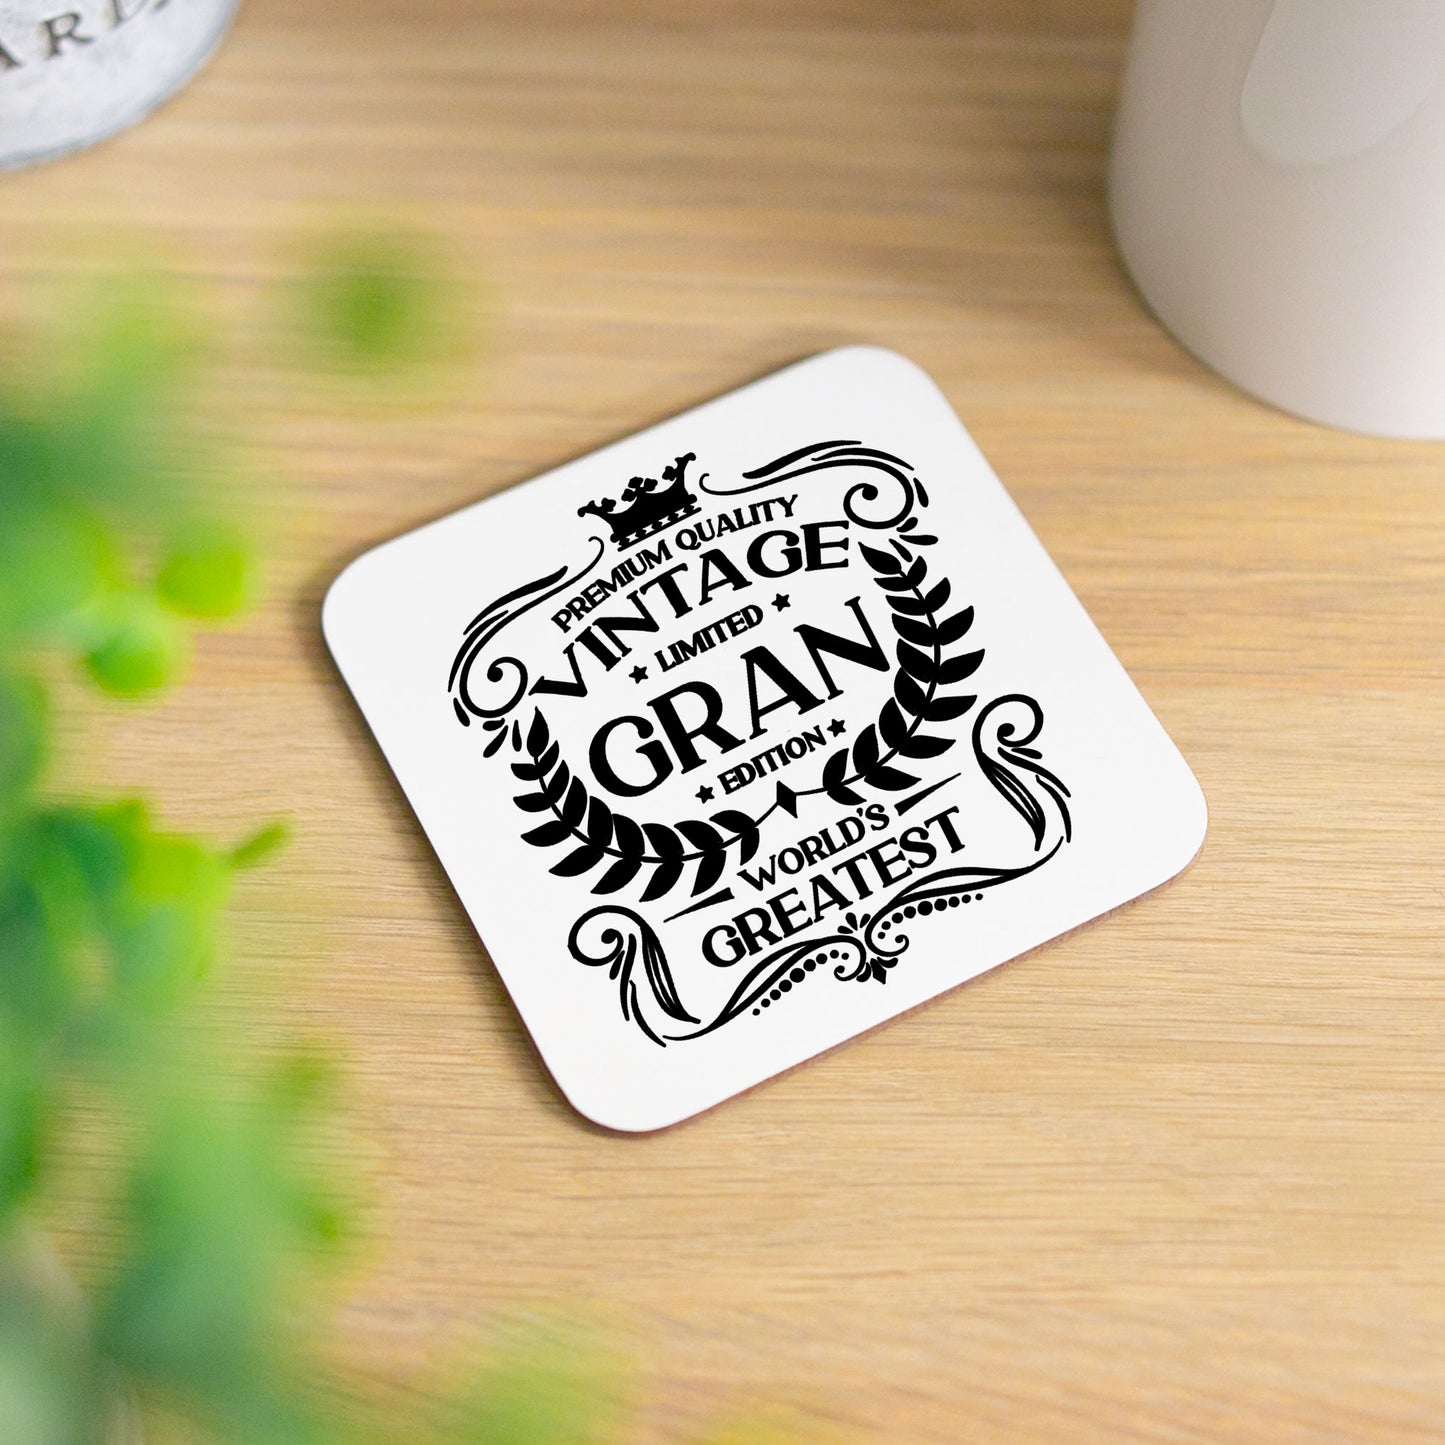 Vintage World's Greatest Gran Engraved Stemless Gin Glass Gift  - Always Looking Good - Glass & Printed Coaster  